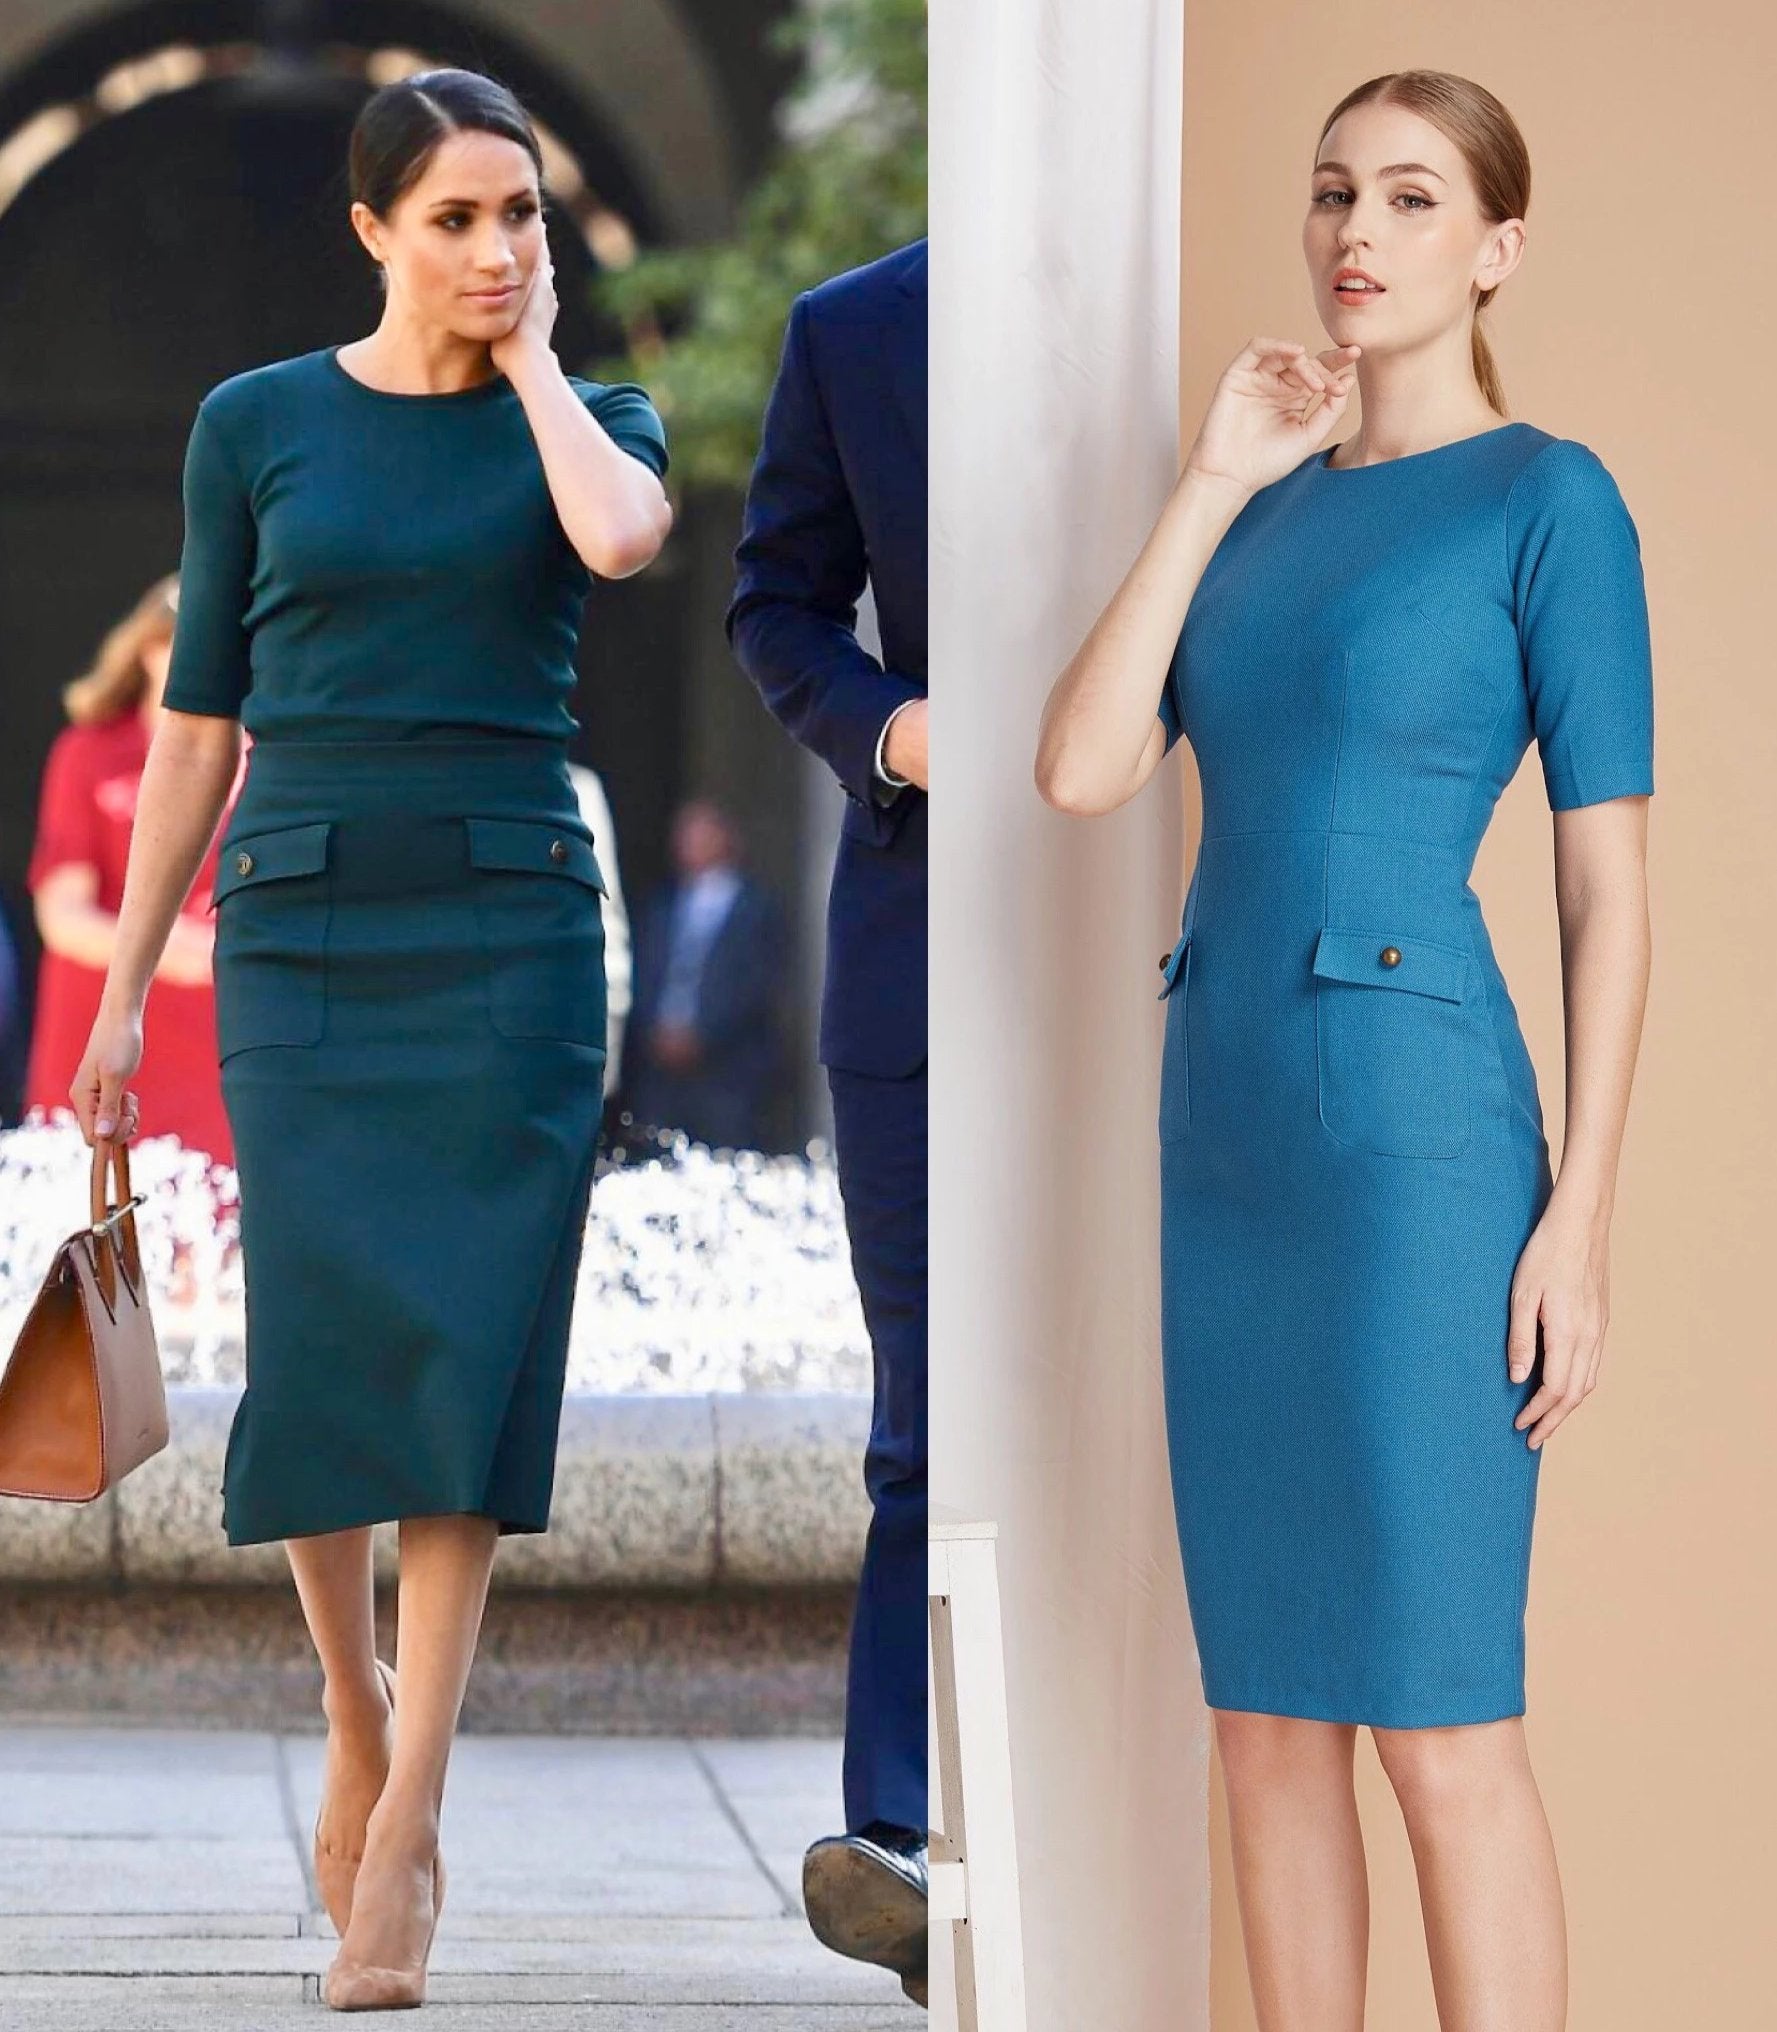 Kate Middleton inspired dress | Celebrity dress, Bridesmaids and ...